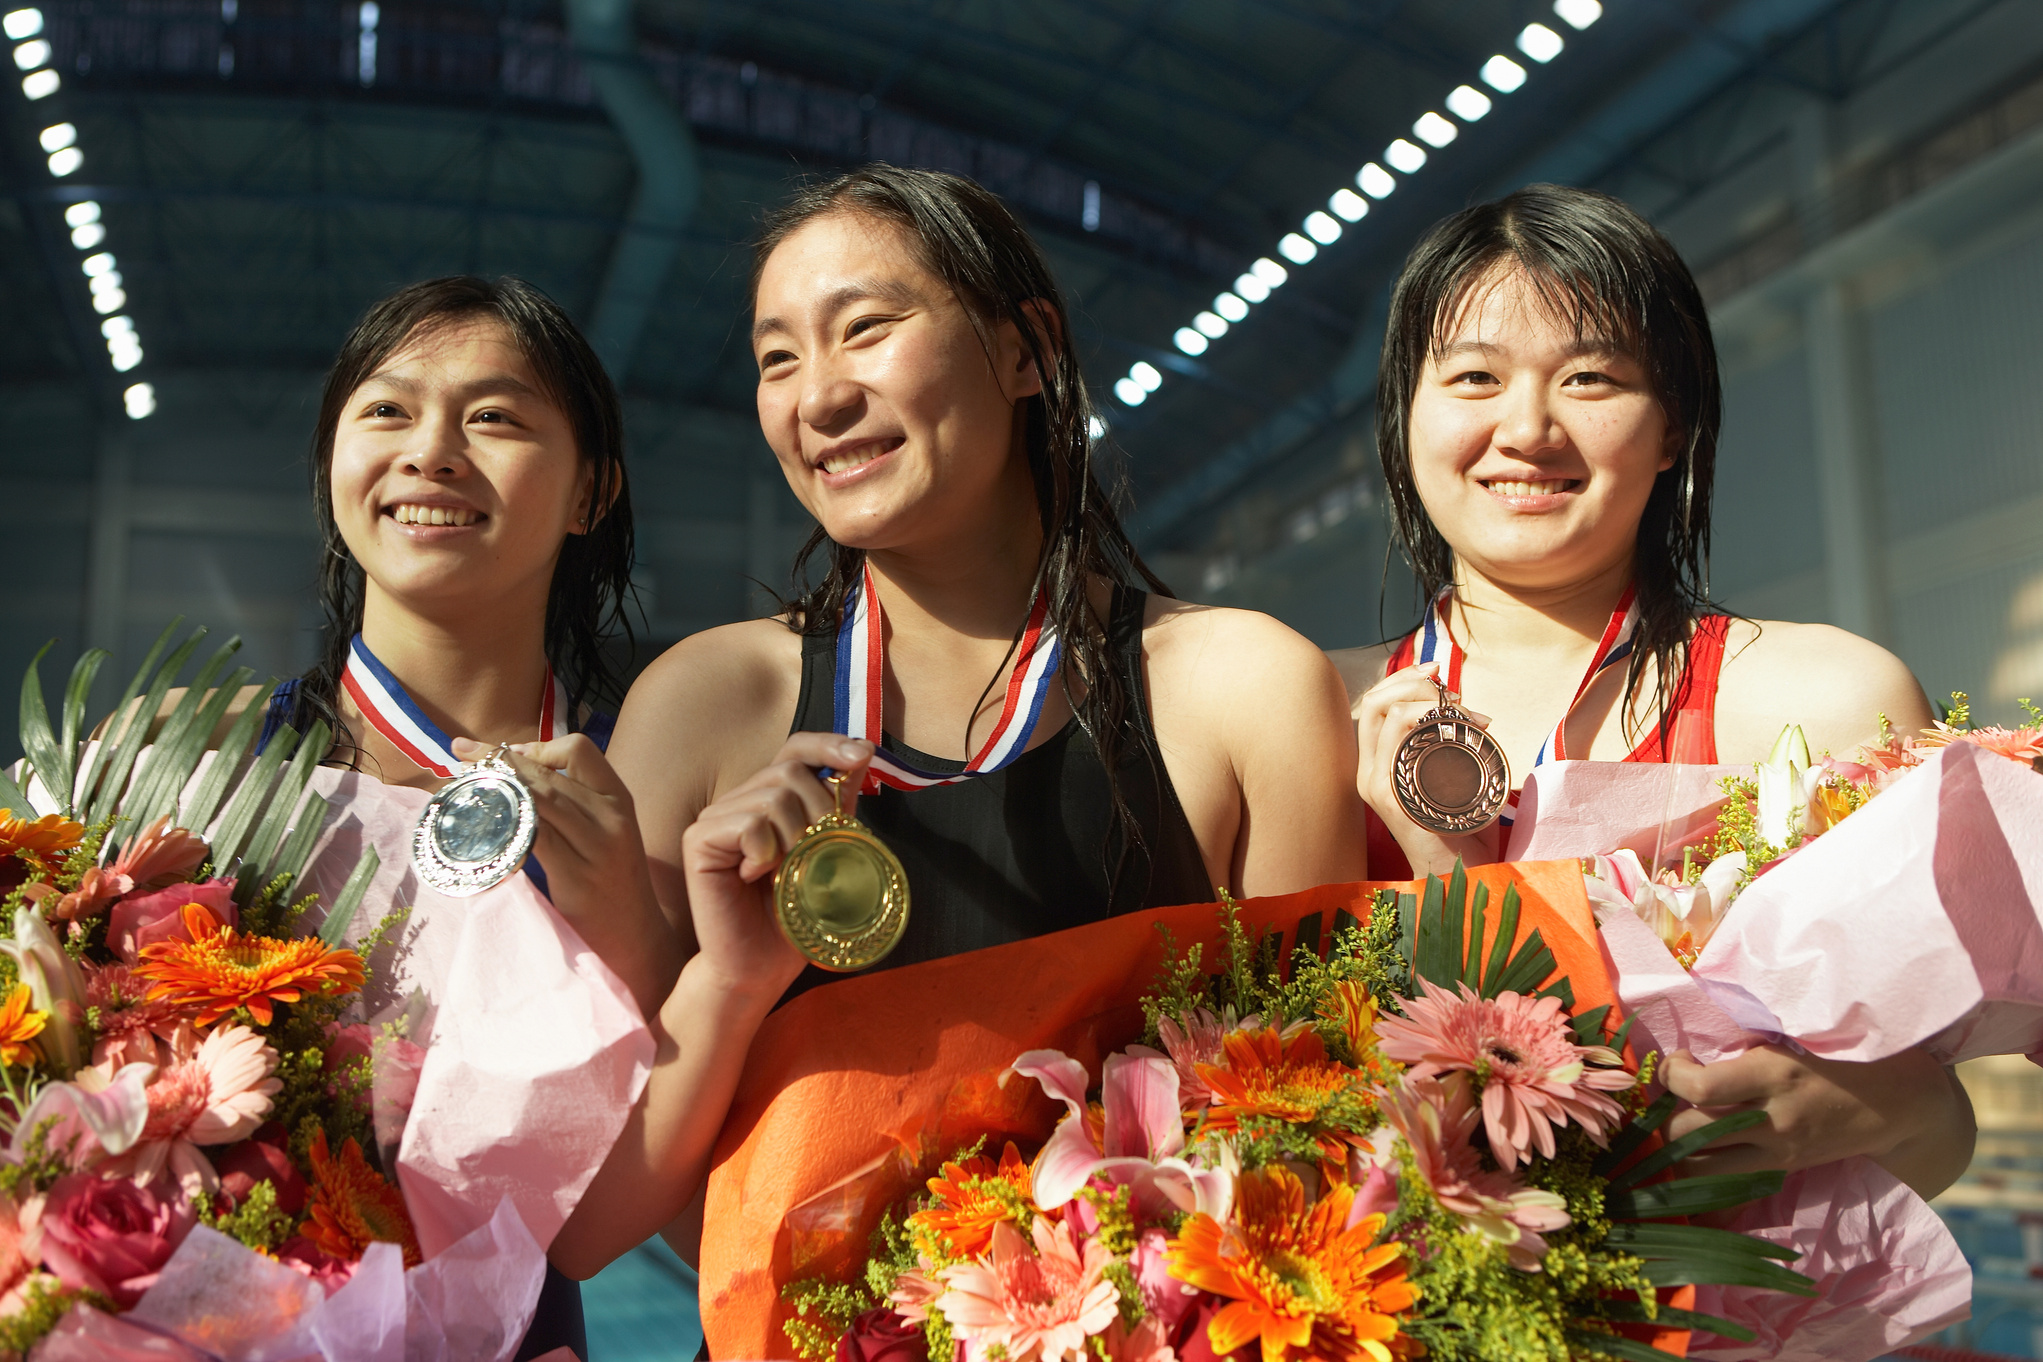 Three young female swimmers displaying medals, smiling